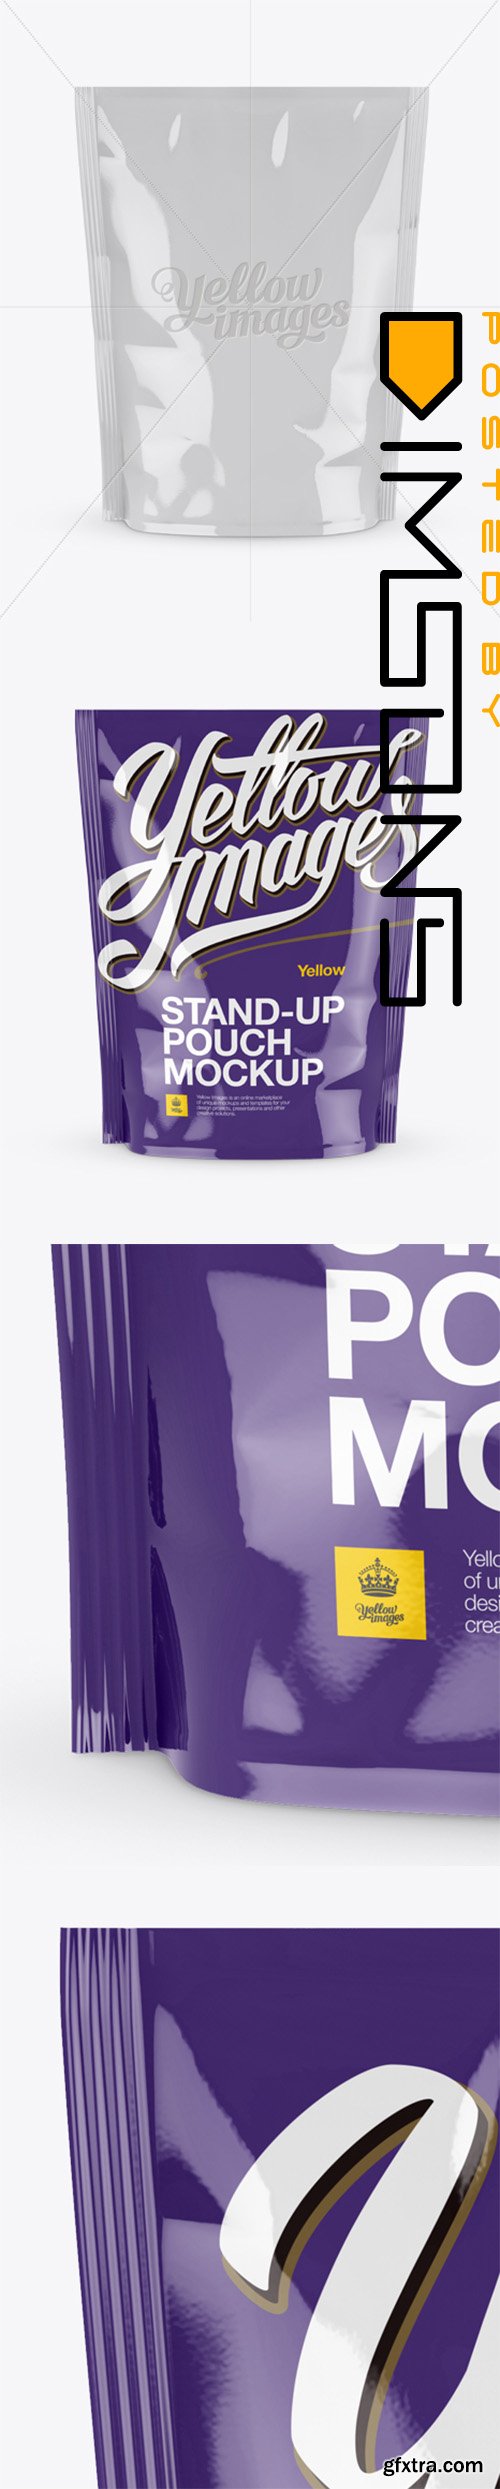 Glossy Stand-up Pouch Mockup - Front View 14093